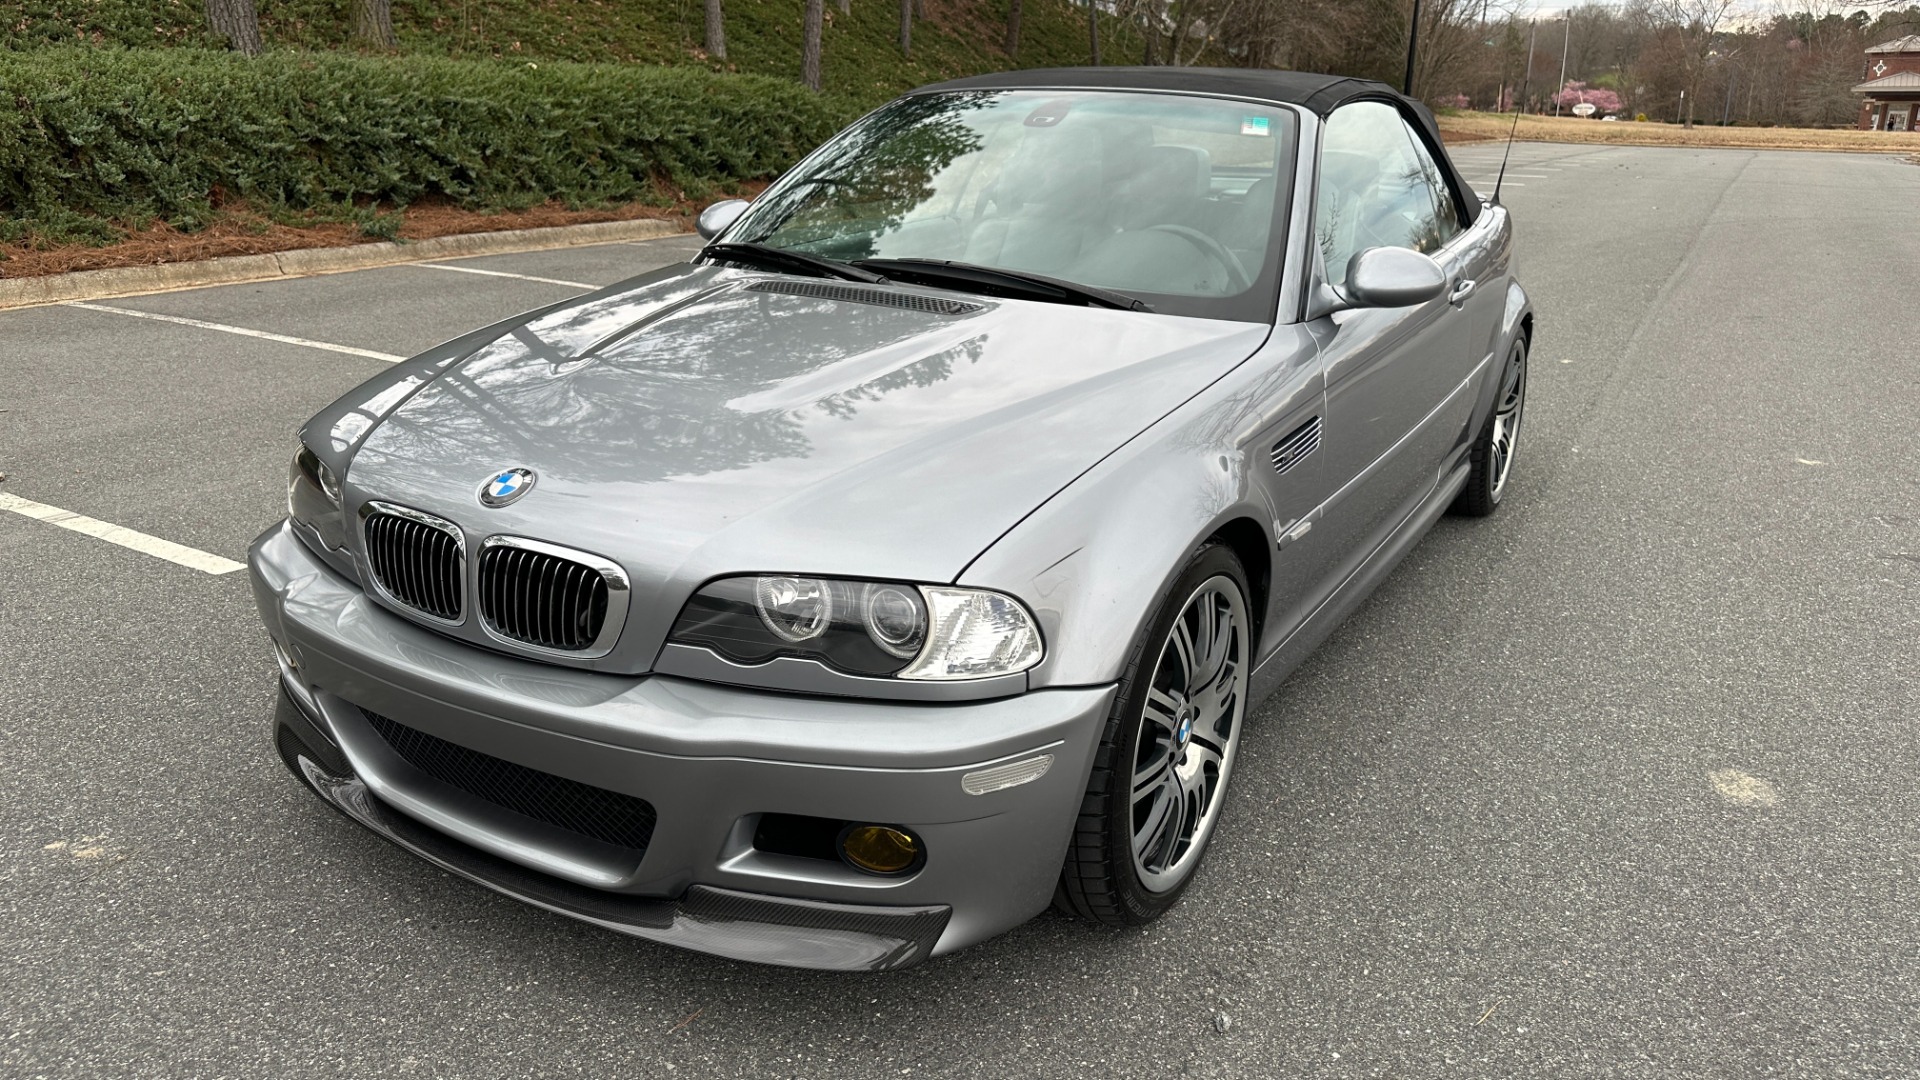 Used 2006 BMW M3 CONVERTIBLE / SMG AUTO / LEATHER / INLINE 6CYL / CARBON FIBER for sale $26,995 at Formula Imports in Charlotte NC 28227 42